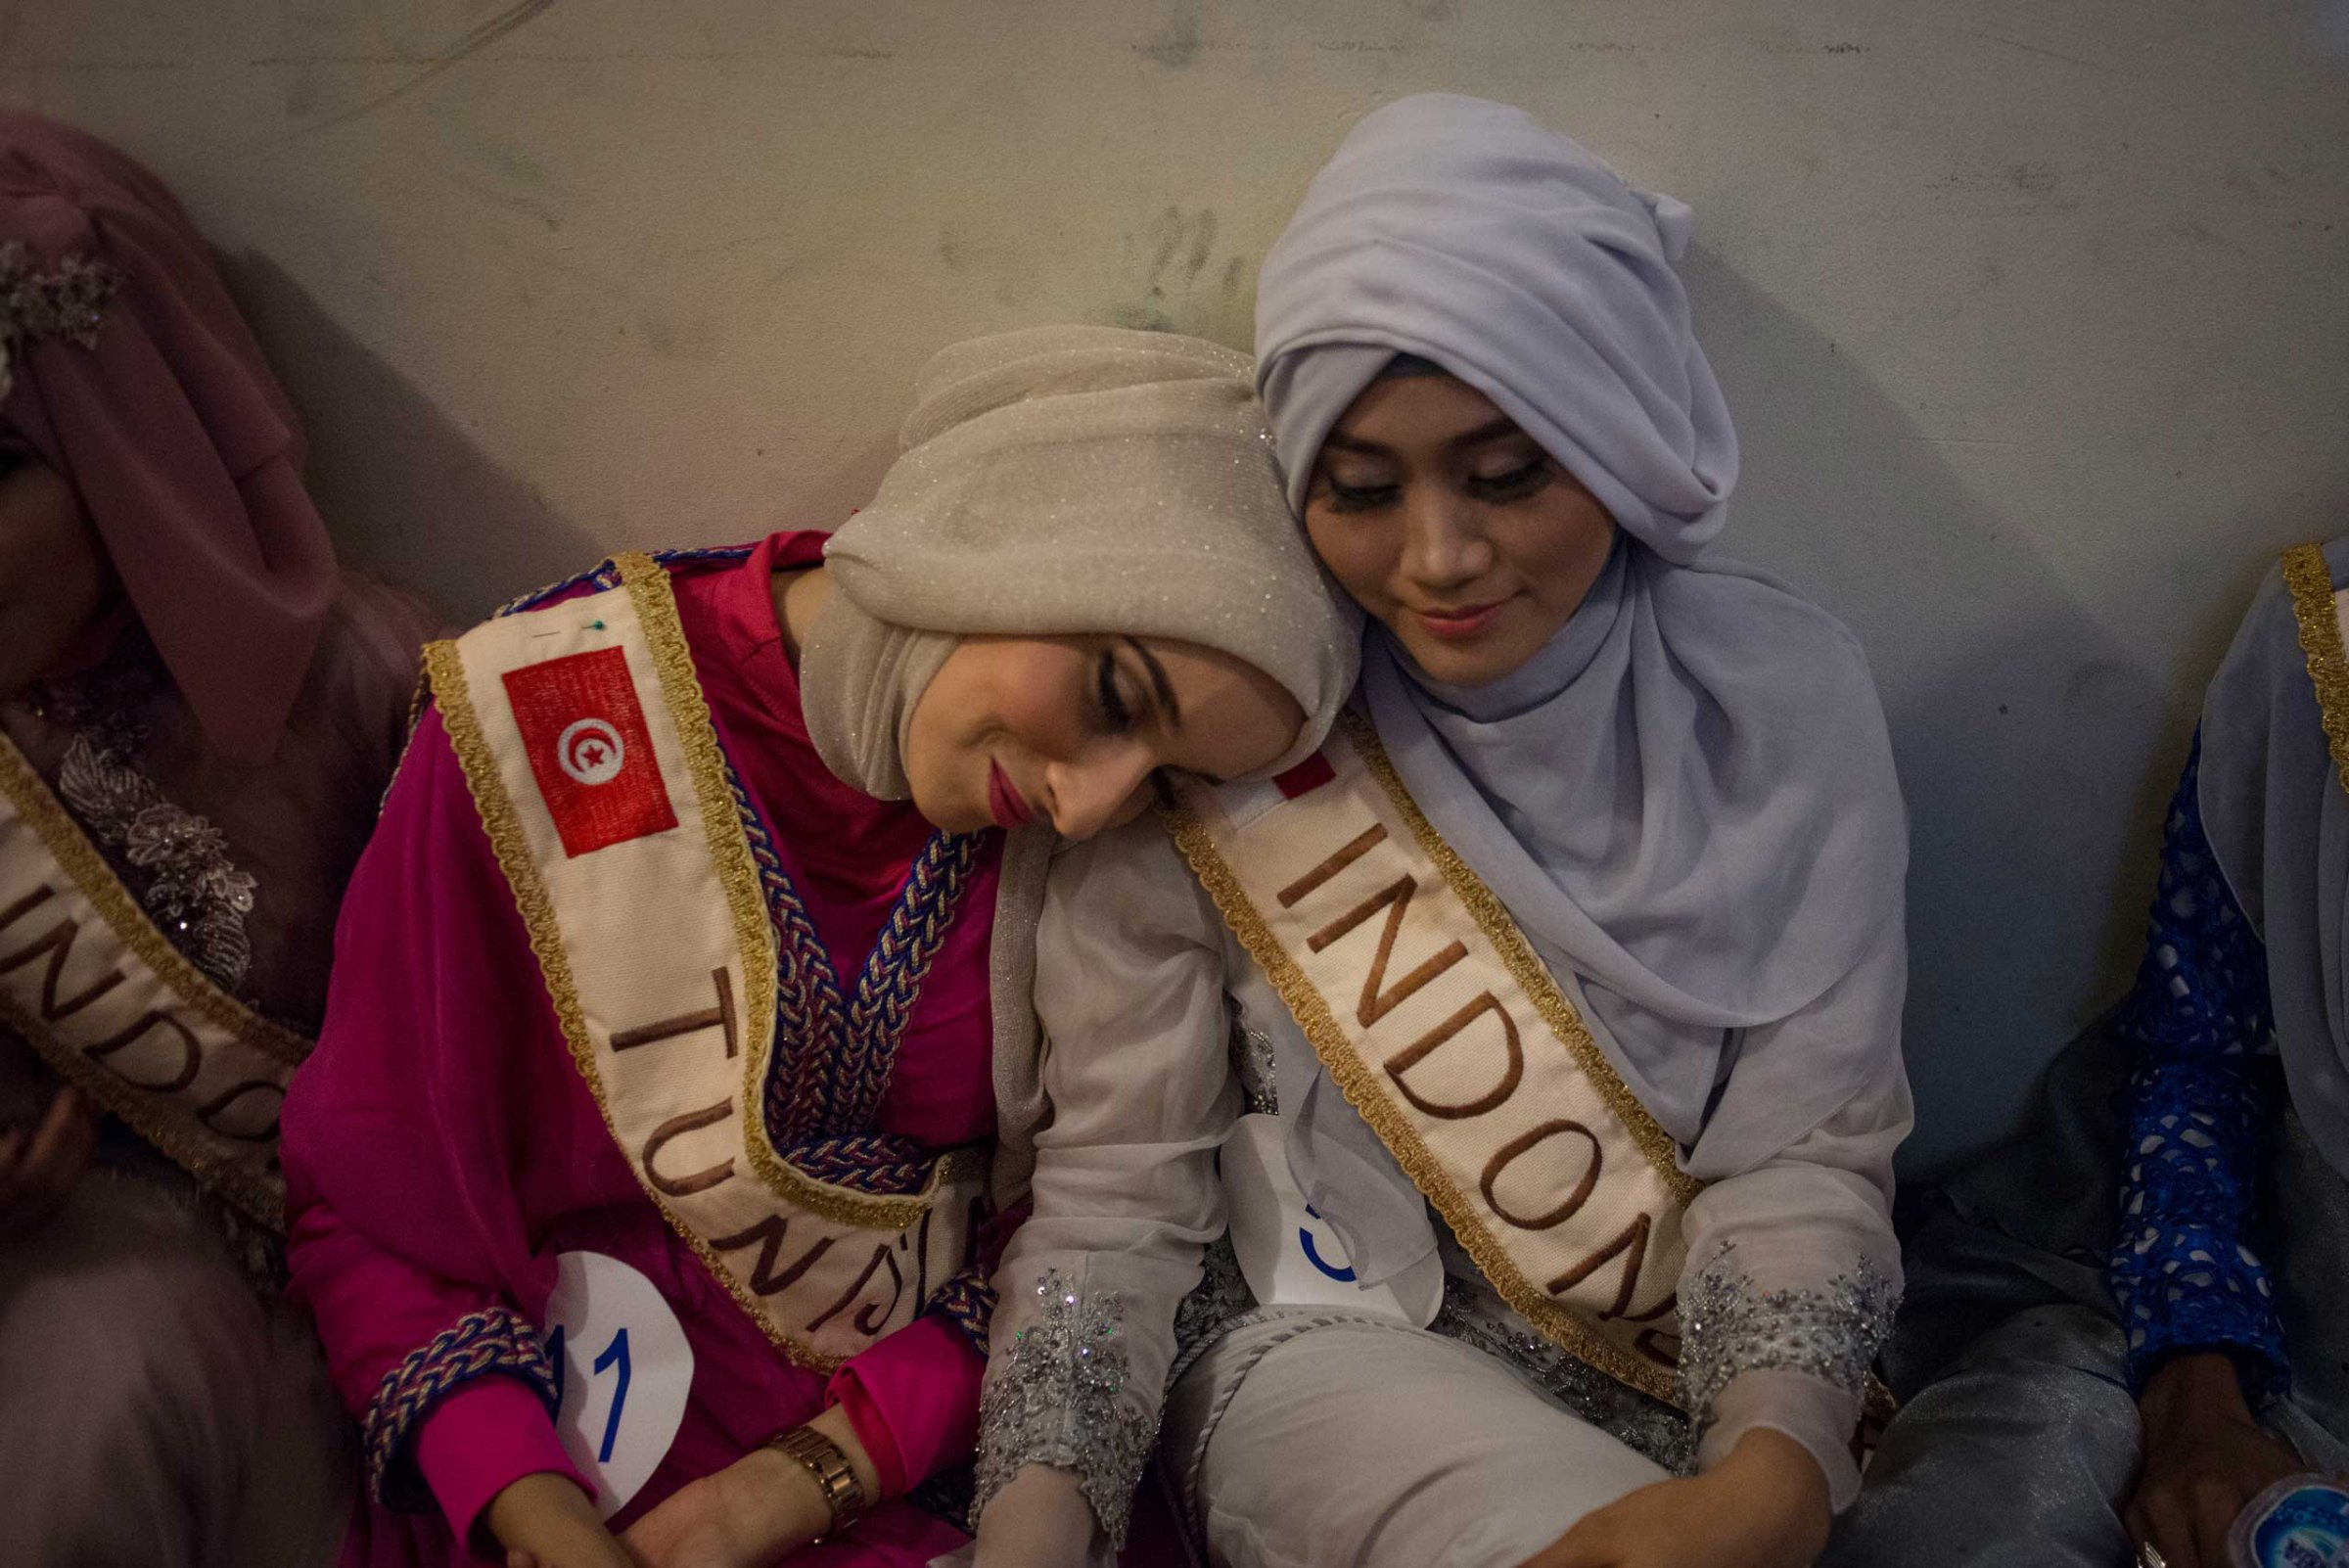 The Grand Finale of the Miss Muslimah World Competition, backstage the girls are anxious and exhausted on November 21st, 2014 in Yogakarta, Indonesia. Pictured Muss Tunisia, Fatma Ben Guefrache, and Primadhita Rahma, one of the Indonesian finalists.Miss Muslimah 2014 an award competition in Indonesia, which intends to be the opposite of a beauty pagent.